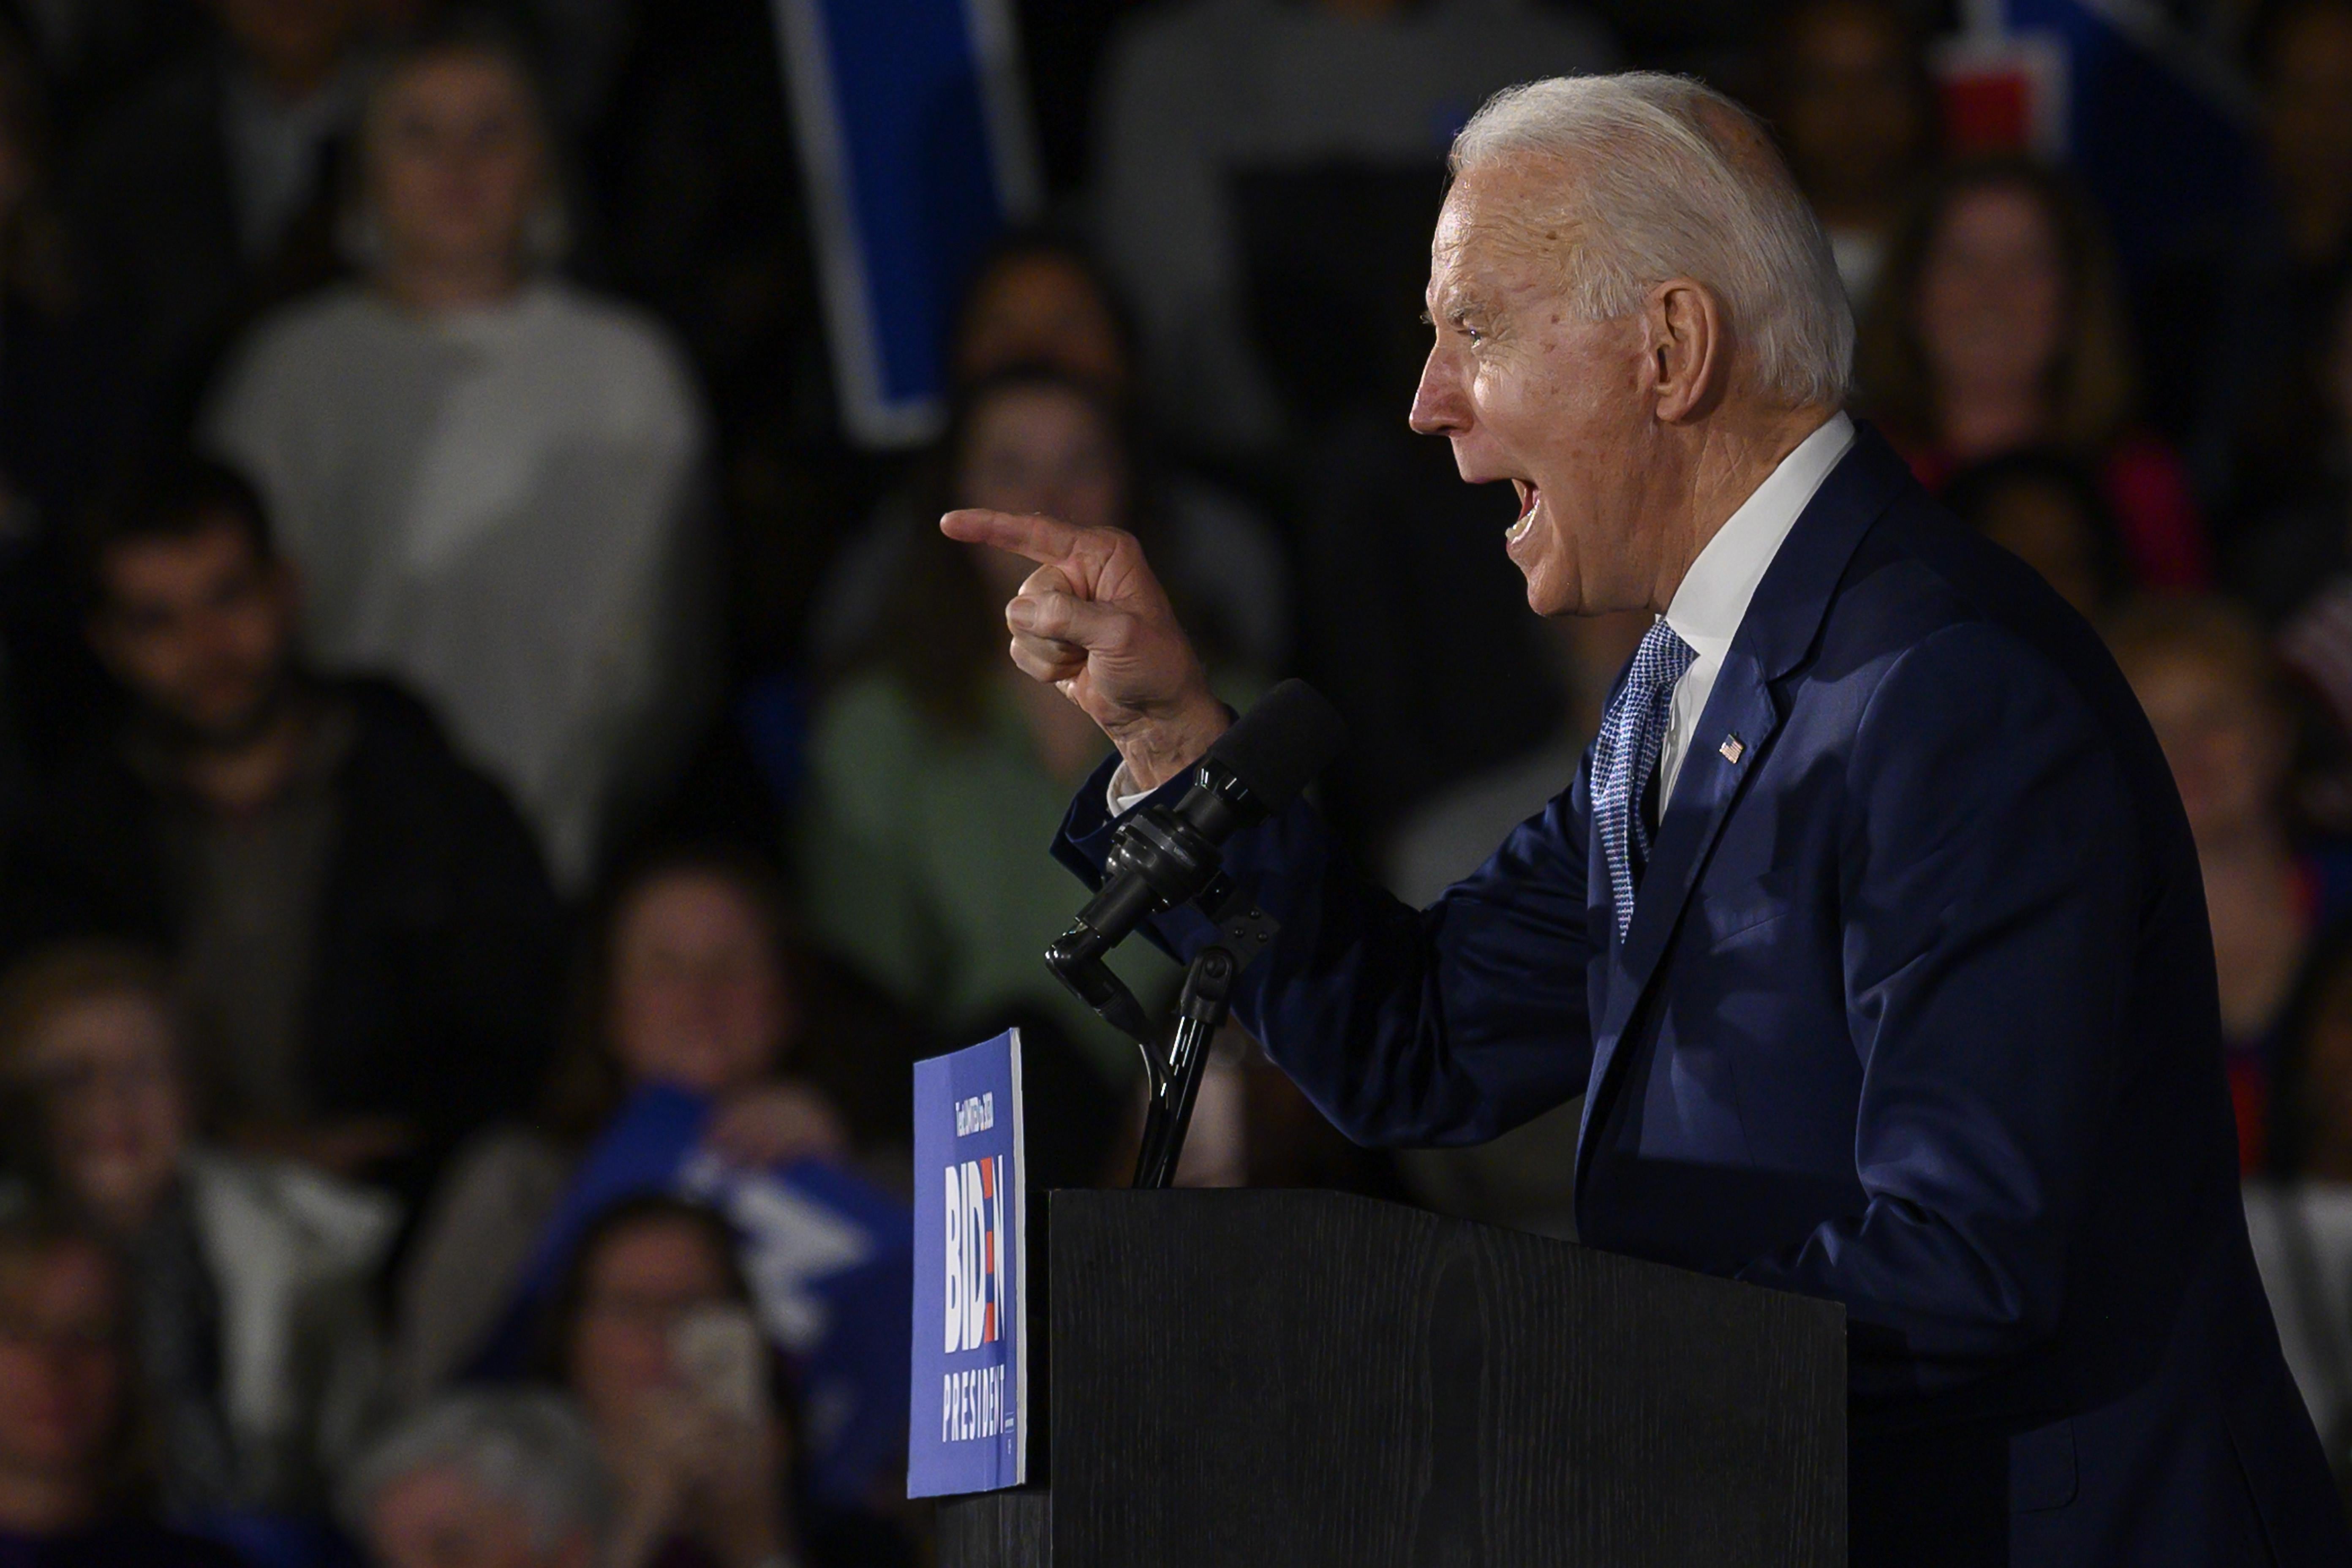 Democratic presidential candidate Joe Biden delivers remarks at his primary night election event in Columbia, South Carolina, on February 29, 2020.